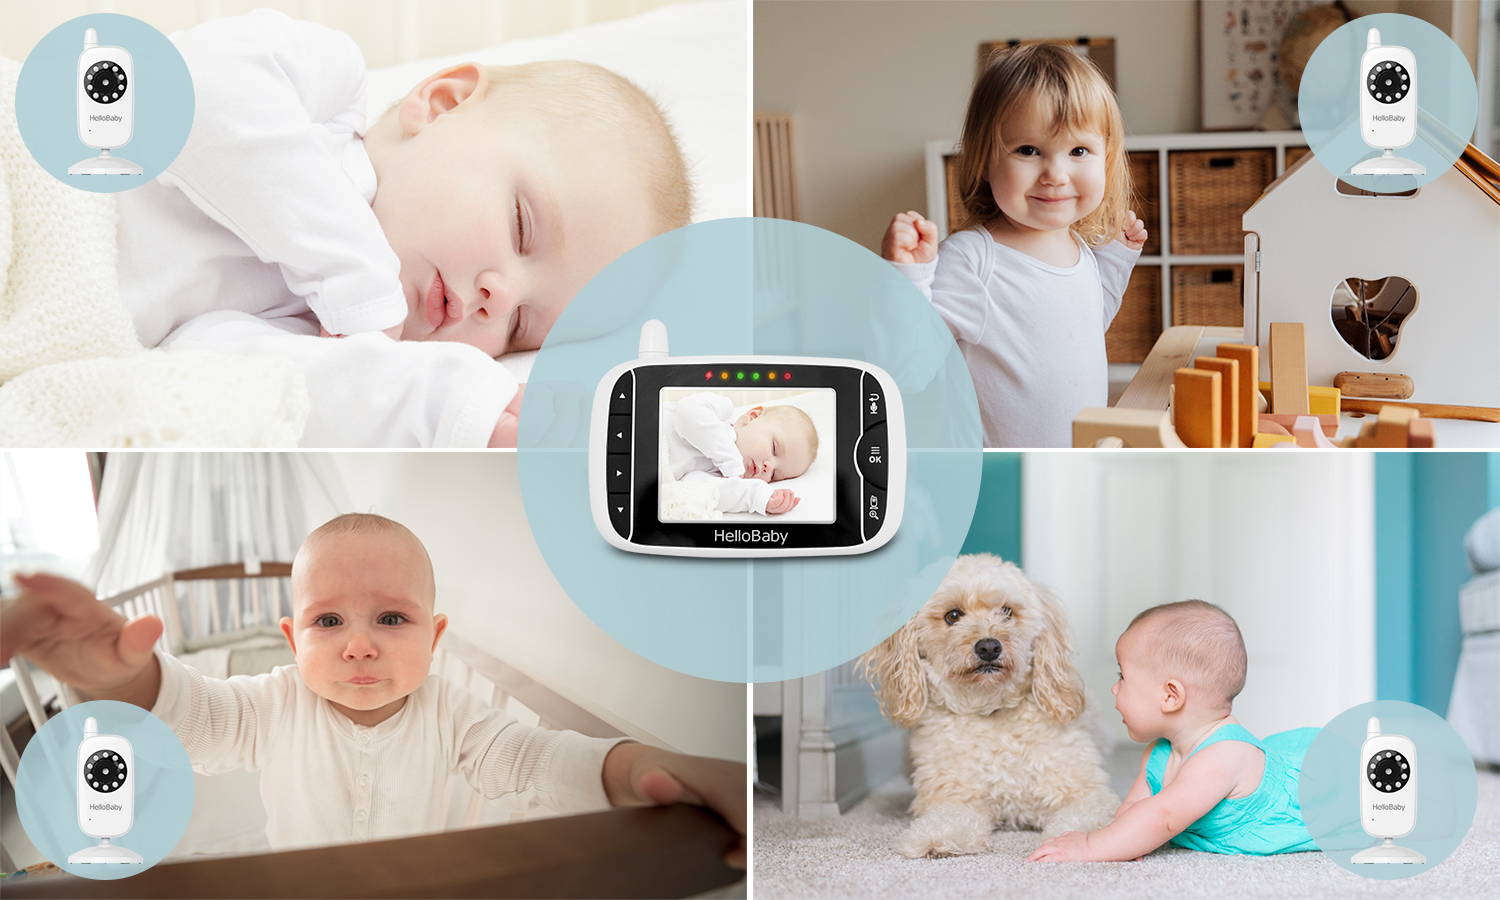 5 Baby Camera Monitor, Hello Baby Monitor with Cameras and Audio, 2  Cameras Remote Pan/ Tilt/ Zoom, VOX Mode, Night Vision, 2-Way Talk, 8  Lullabies, Temperature and 1000ft Range HB6550-Two Cams